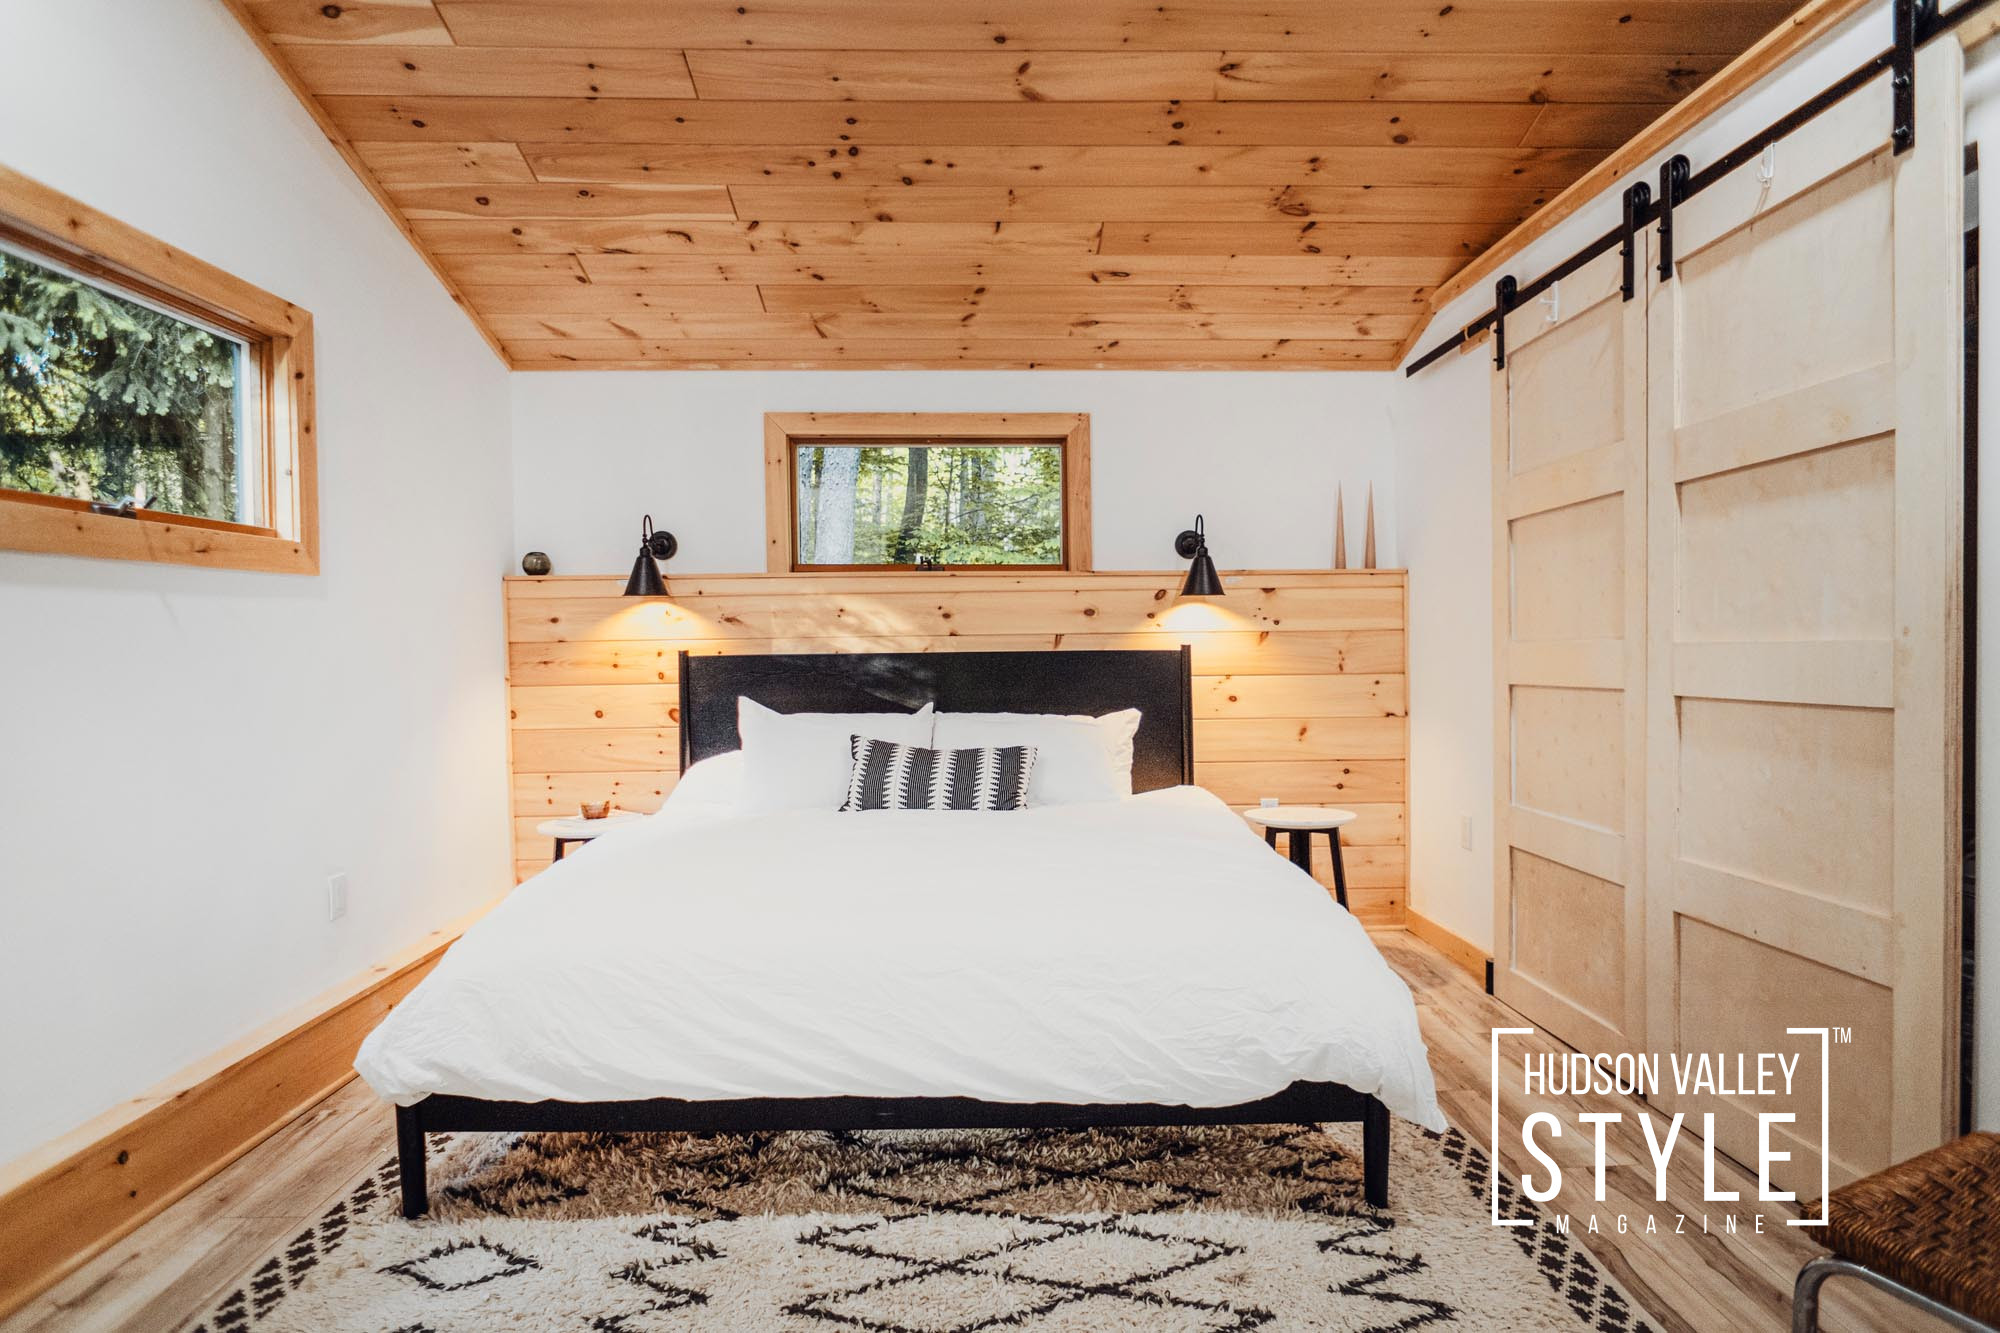 Discover a Cozy Modern Rustic Airbnb Cabin With Stunning Views of the Catskill Mountains – Presented by Alluvion Vacations – Airbnb Photography by Maxwell Alexander / Alluvion Media